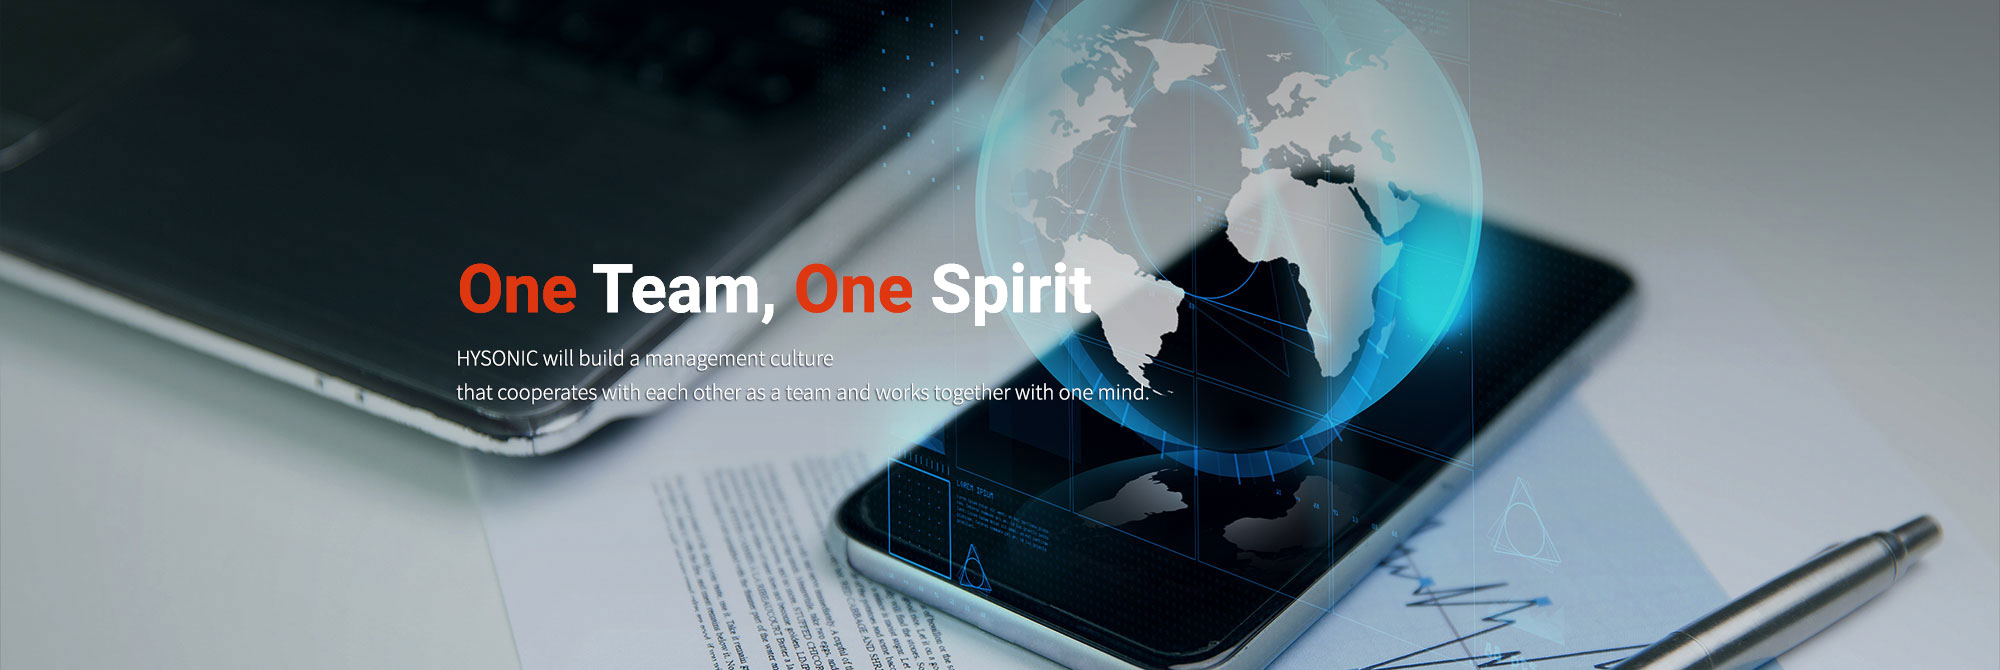 One Team, One Spirit HYSONIC will build a management culture that cooperates with each other as a team and works together with one mind.